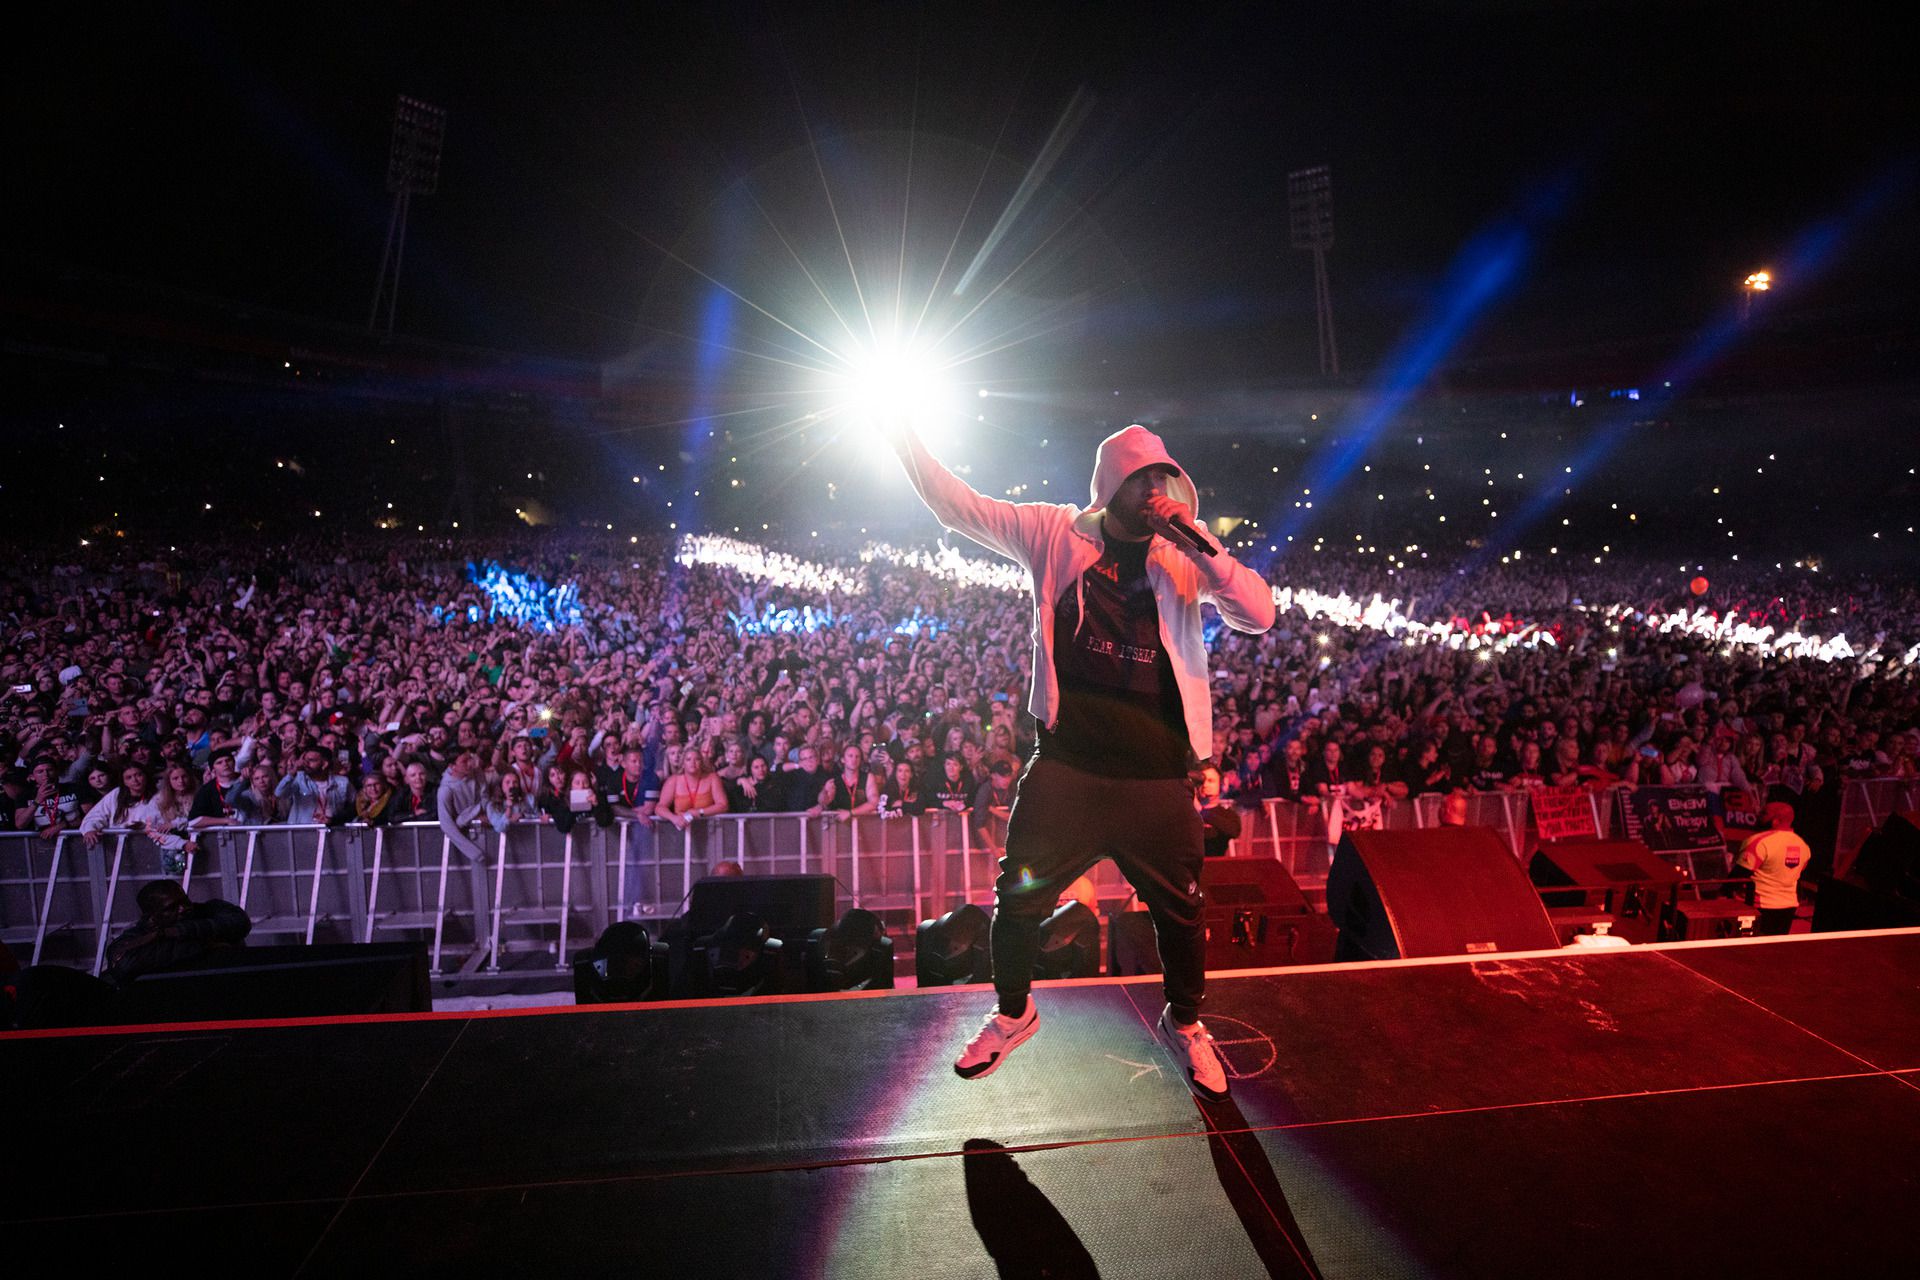 D12 Announce UK Tour Dates and Venues  Eminem.Pro - the biggest and most  trusted source of Eminem